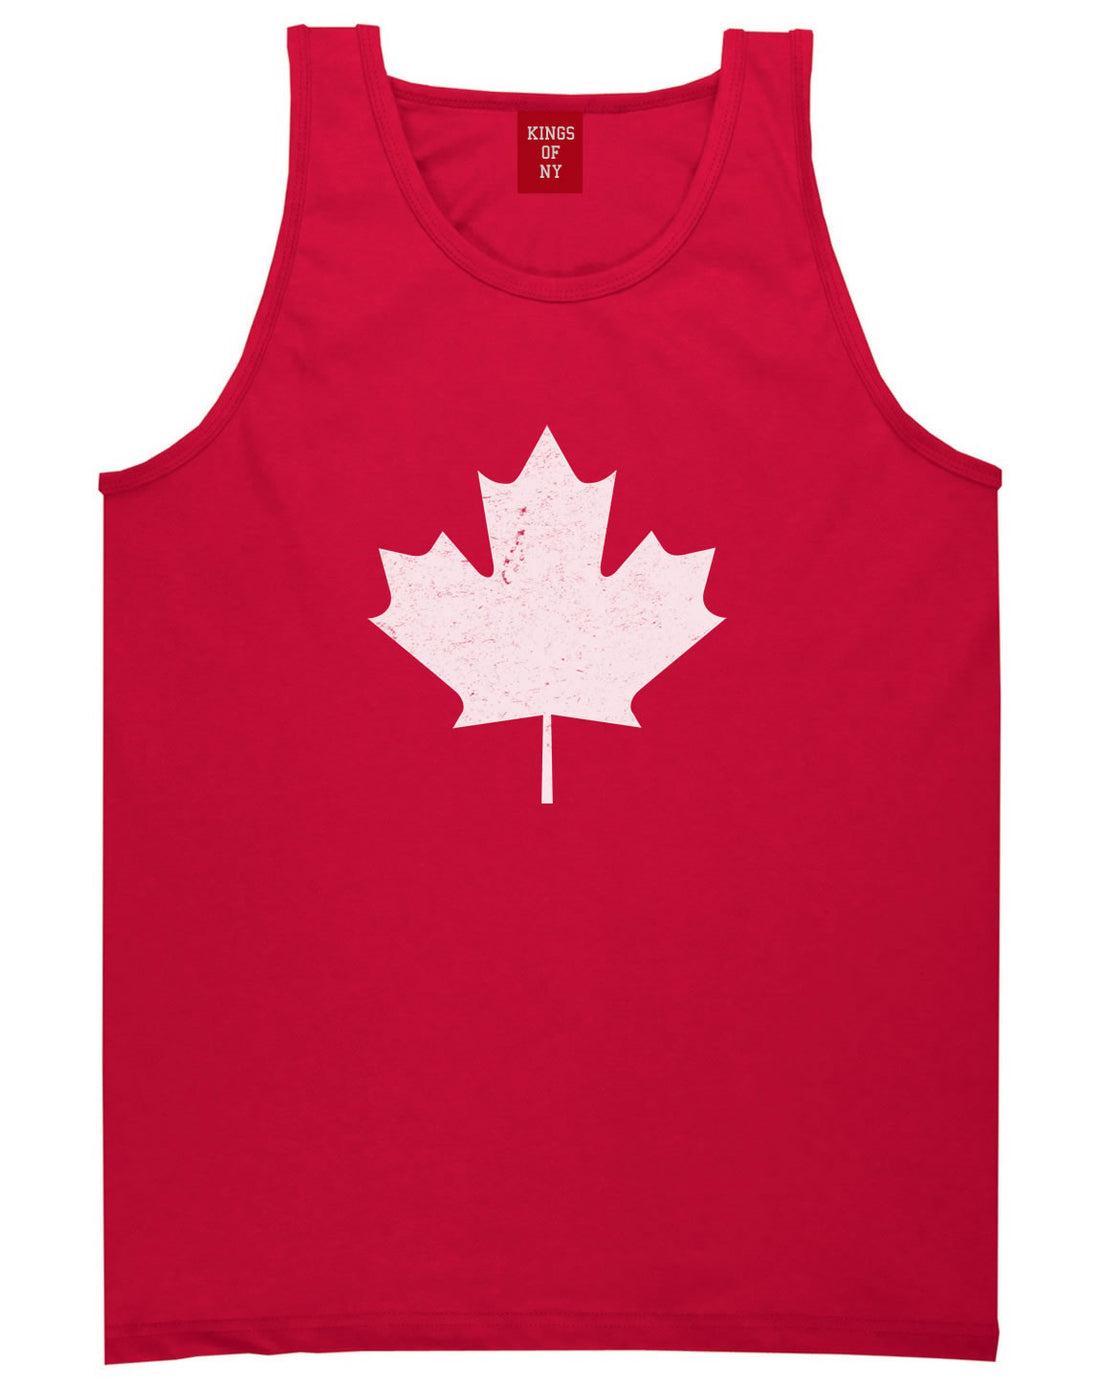 Maple Leaf Tank Top by Kings Of NY